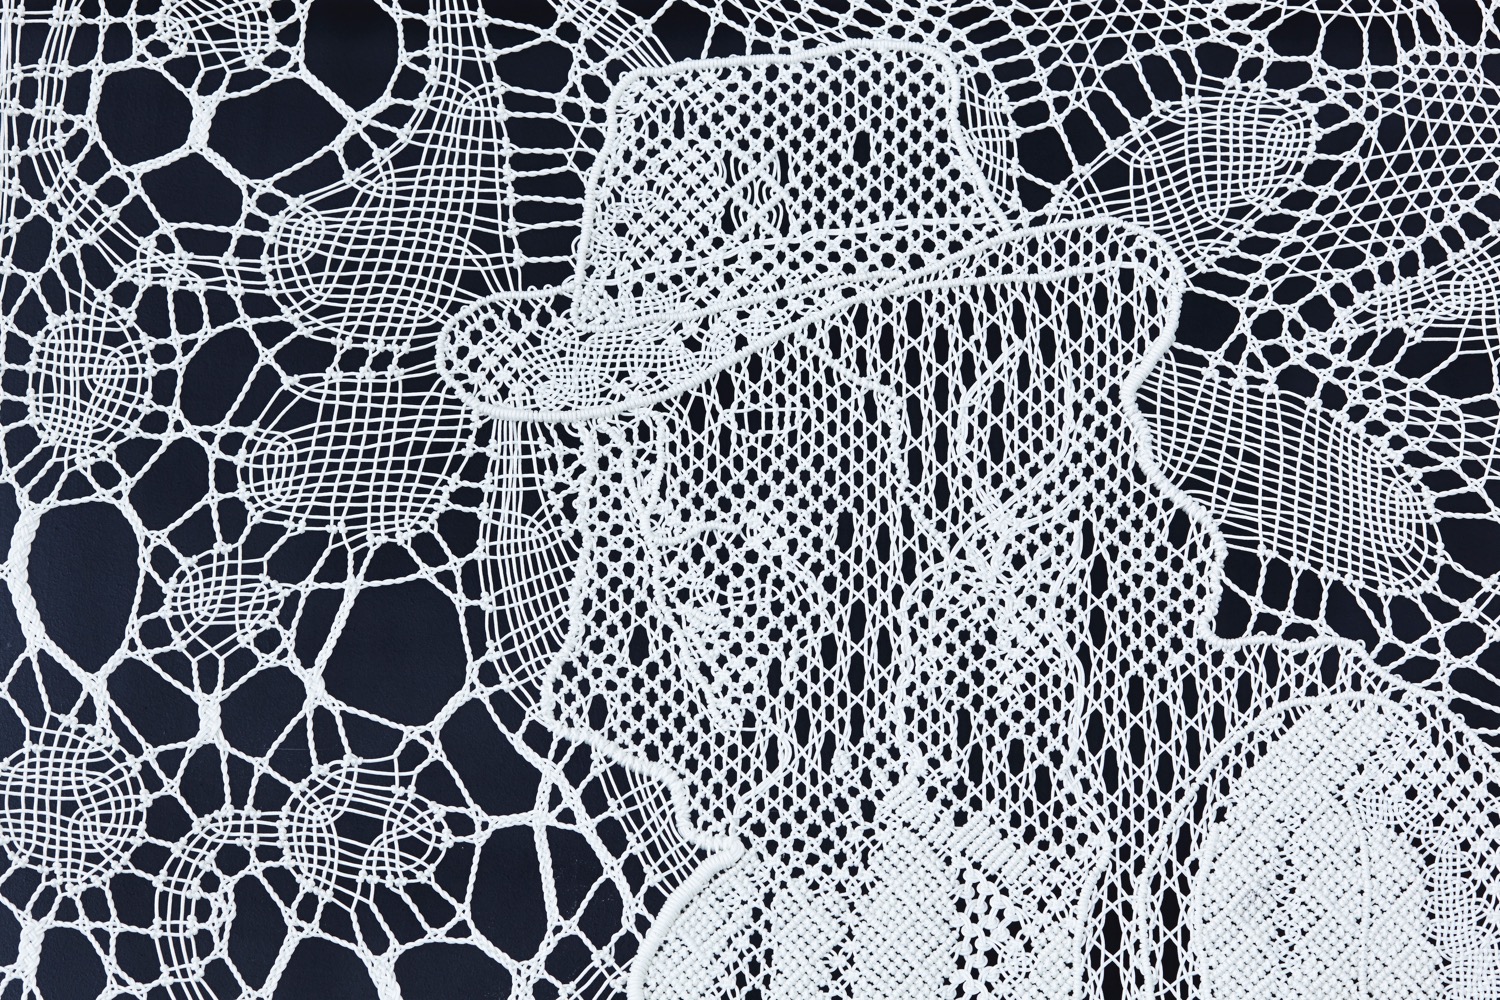 Pierre Fouché. Brett posing for an imaginary portrait of Raymond Buys (2015). Bobbin lace and macramé in polyester braid. 265 x 140cm. Private collection.